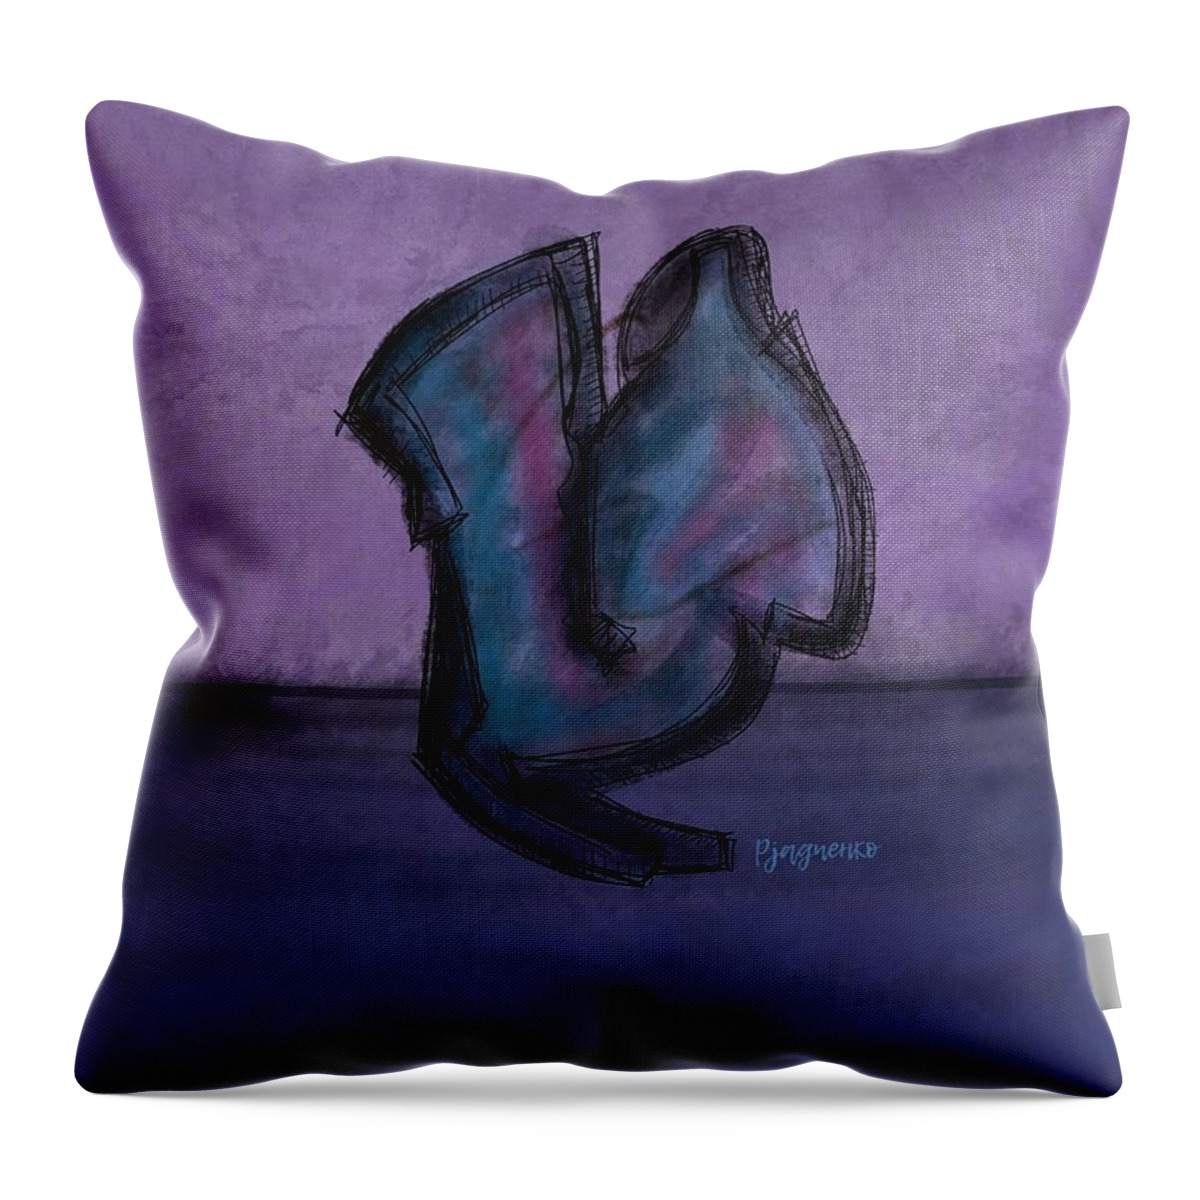 Cocoon Throw Pillow featuring the digital art Cocoon #9 by Ljev Rjadcenko